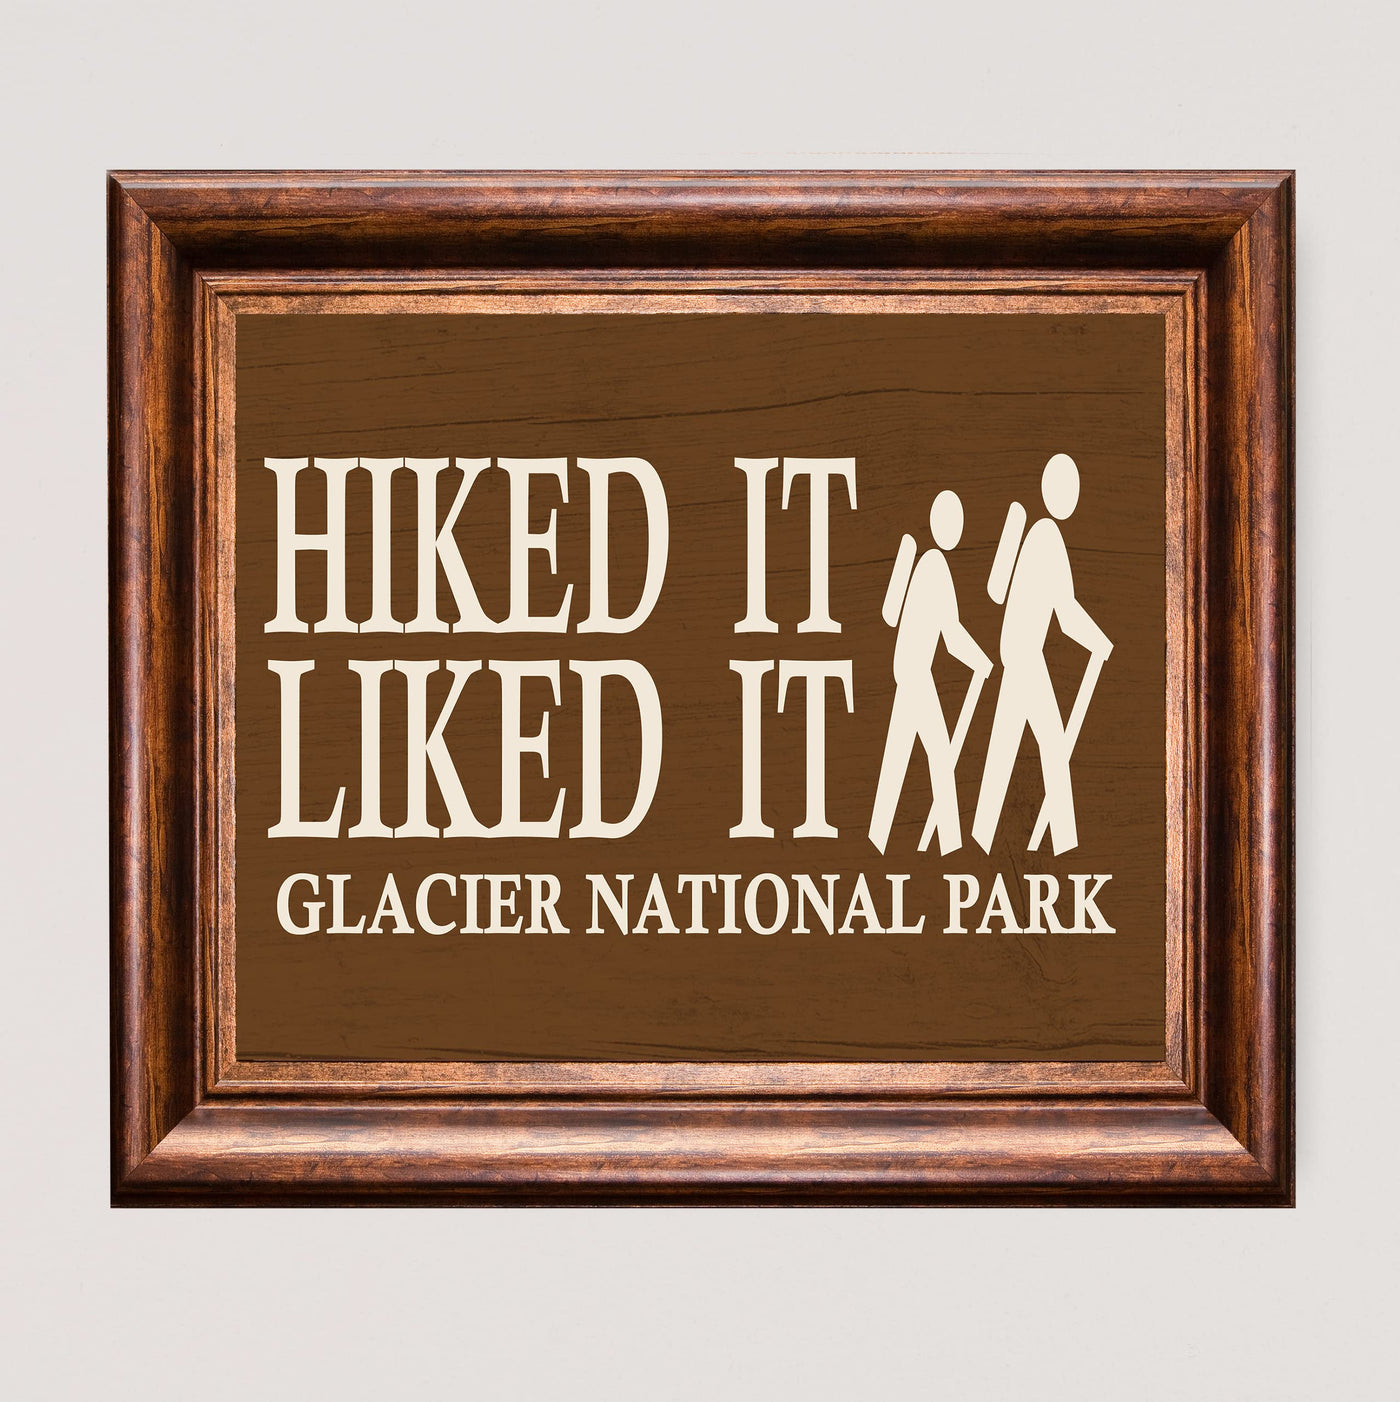 Glacier National Park-Hiked It, Liked It-Rustic Wall Decor Print- 10 x 8" Funny Outdoors Print-Ready to Frame. Replica Distressed Wood Design for Home-Cabin-Deck-Lodge-Lake. Printed on Photo Paper.